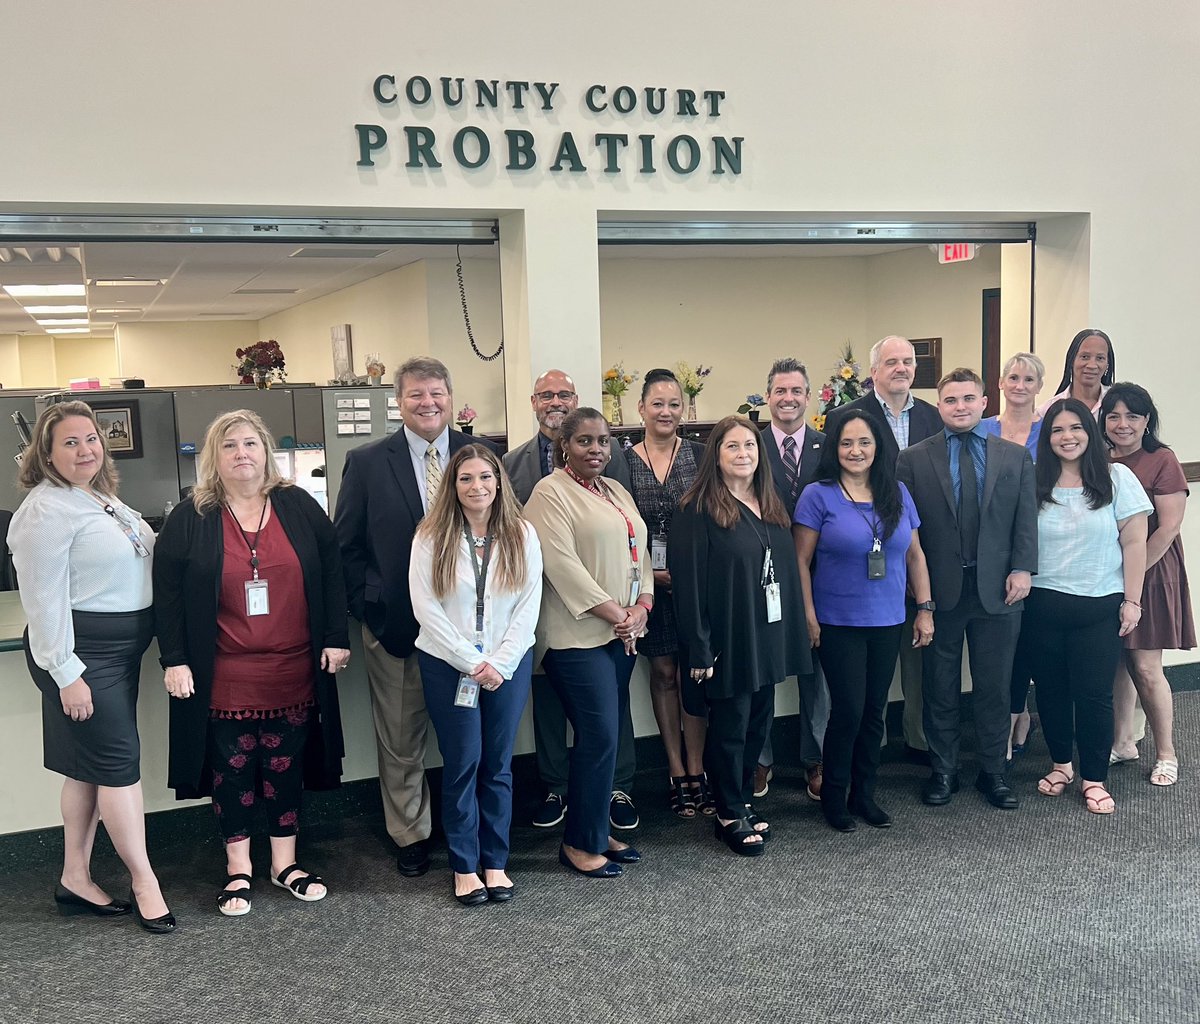 Probation officers are the backbone of our justice system. They bridge the gap between the judicial system and our communities. Join us in thanking our hardworking employees this week and year round! #PPPSWeek #StrongerTogether #CollierCounty #SWFL #SWFLCourts #FLCourts